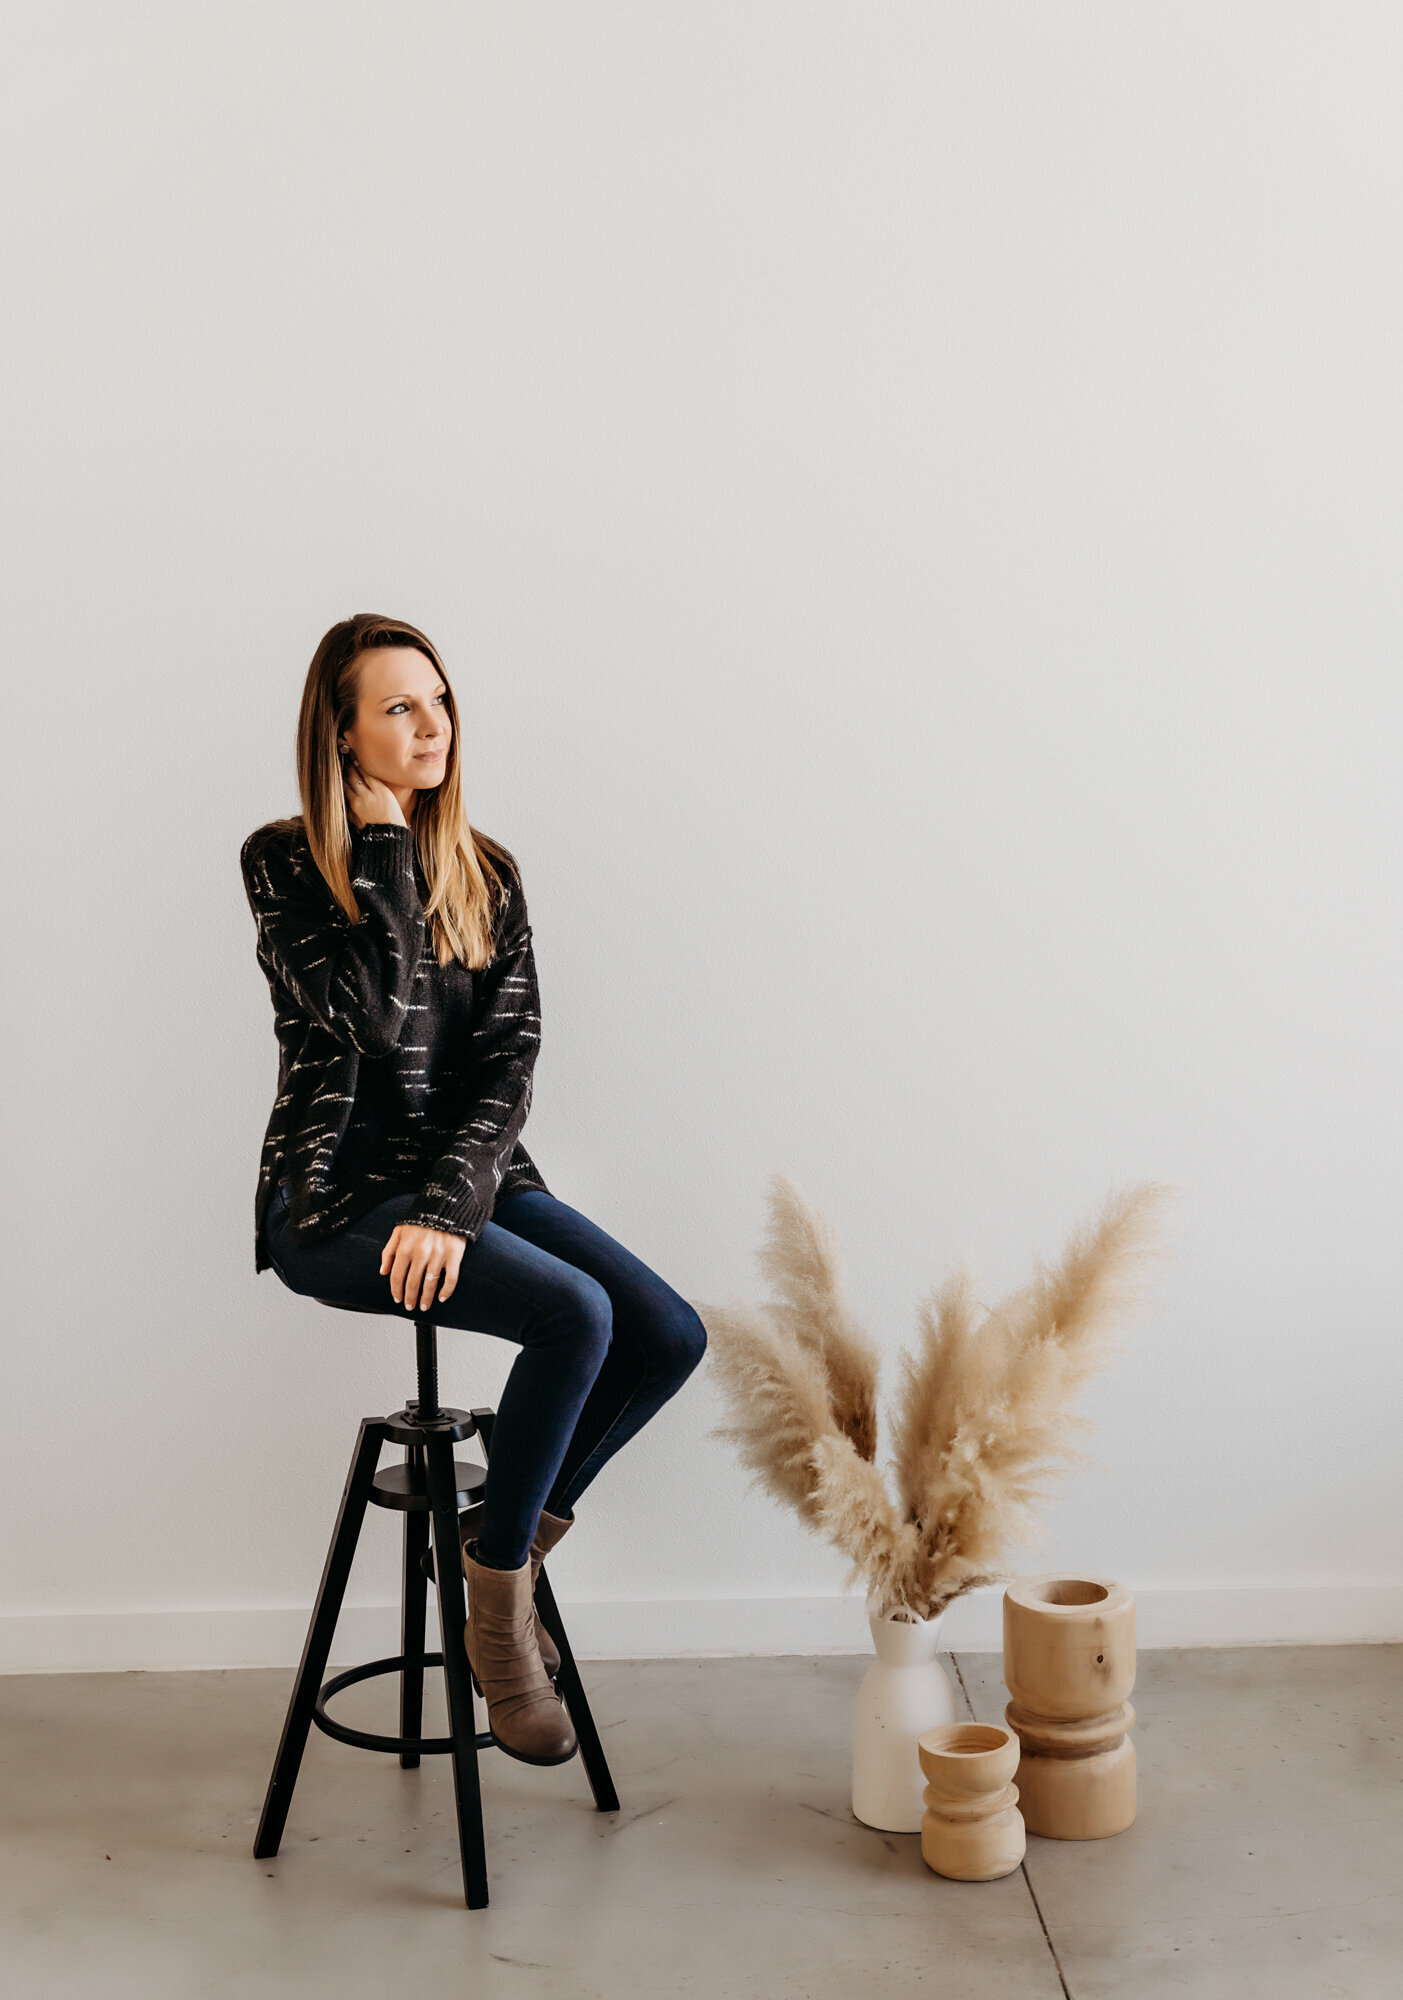 Branding Photographer, a woman sits on a stool in an empty room, only a some pots with pampas grass